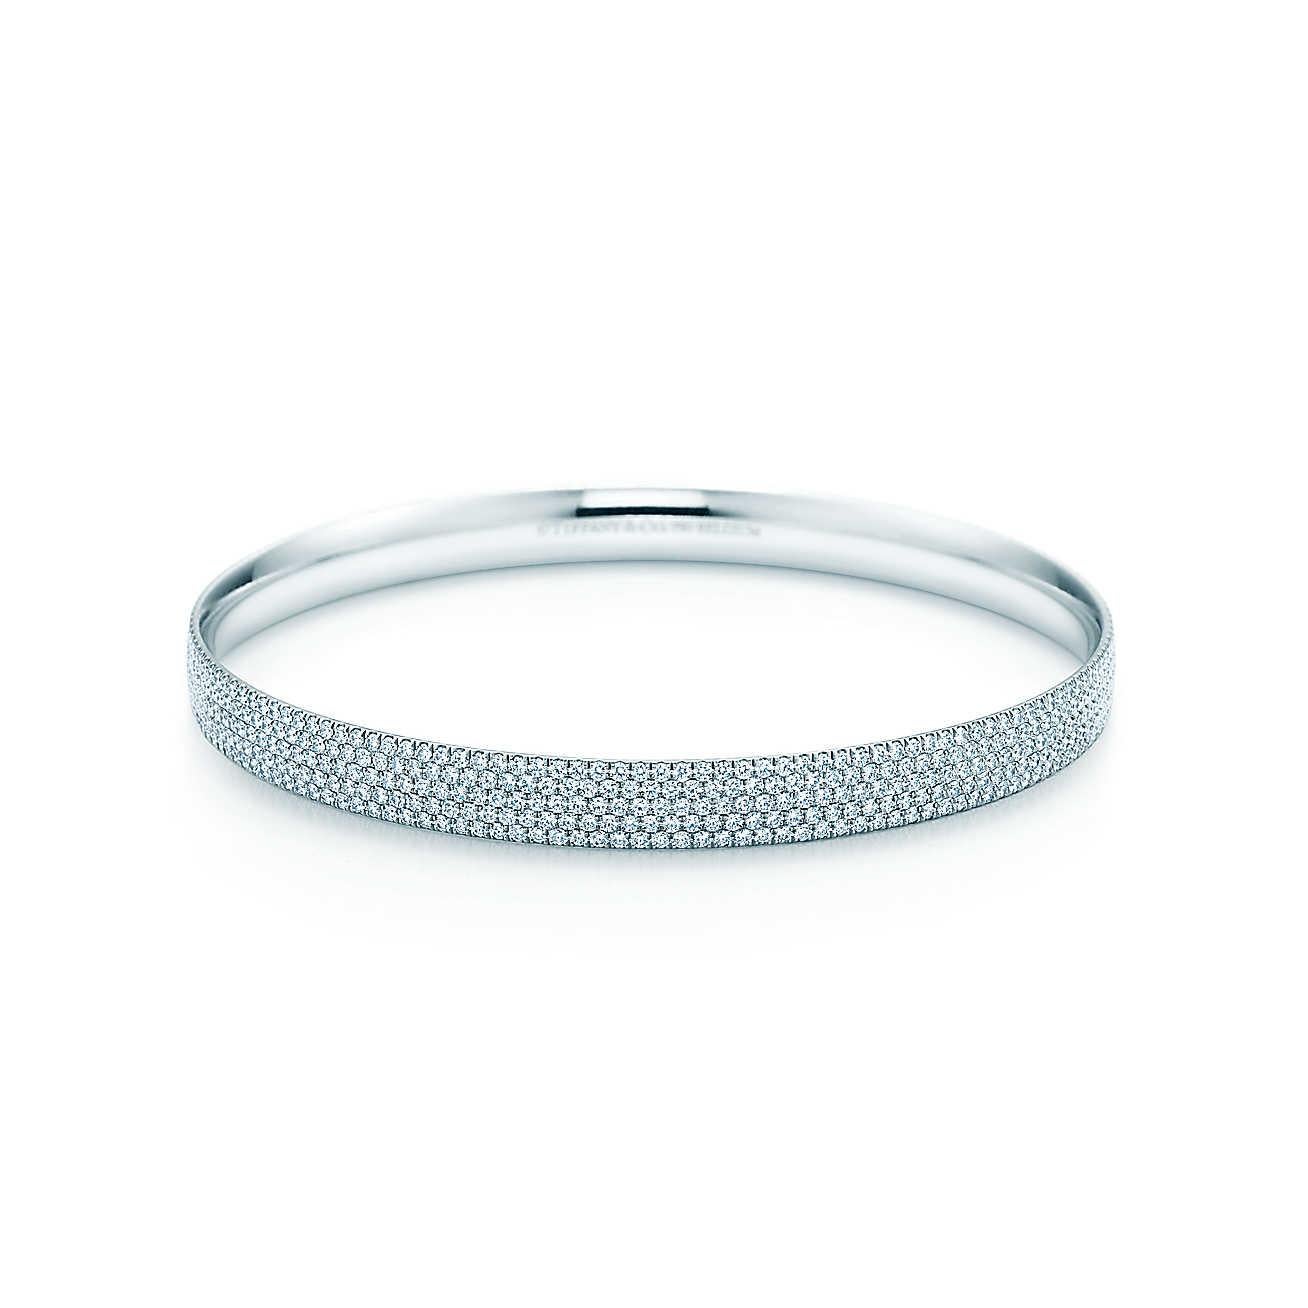 Streamlined and modern, the Tiffany Metro collection twinkles like a nighttime city skyline. Rows of diamonds effortlessly enhance this striking bangle.
Exceptional elegance, aesthetic sophistication and exquisite craftsmanship meet in this